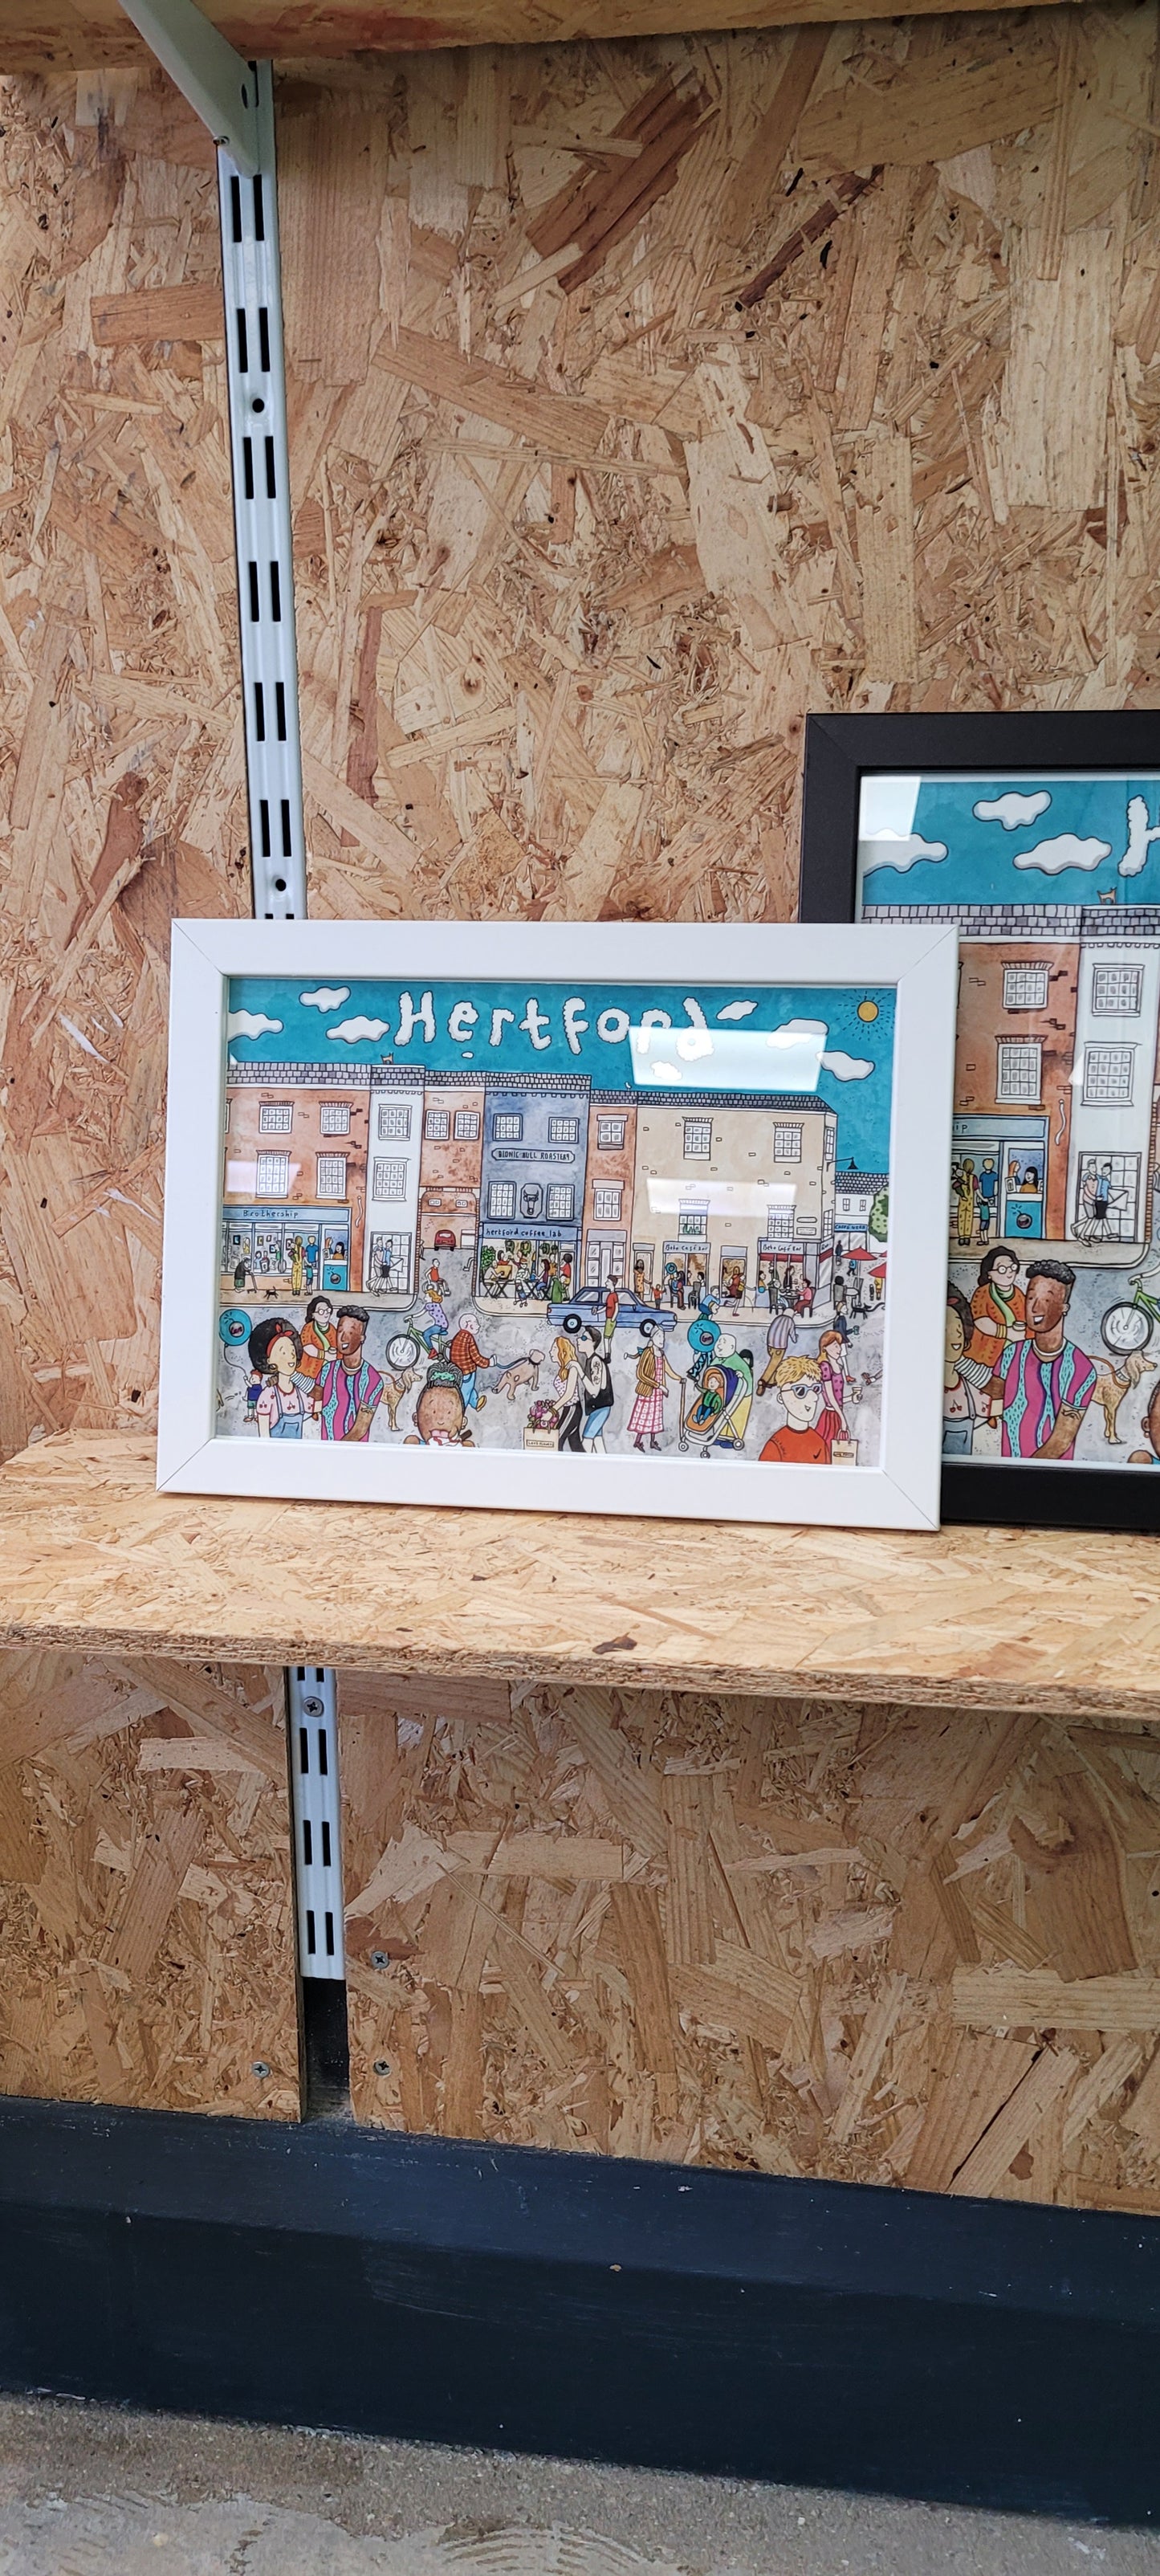 Hertford Print by Claire Spake